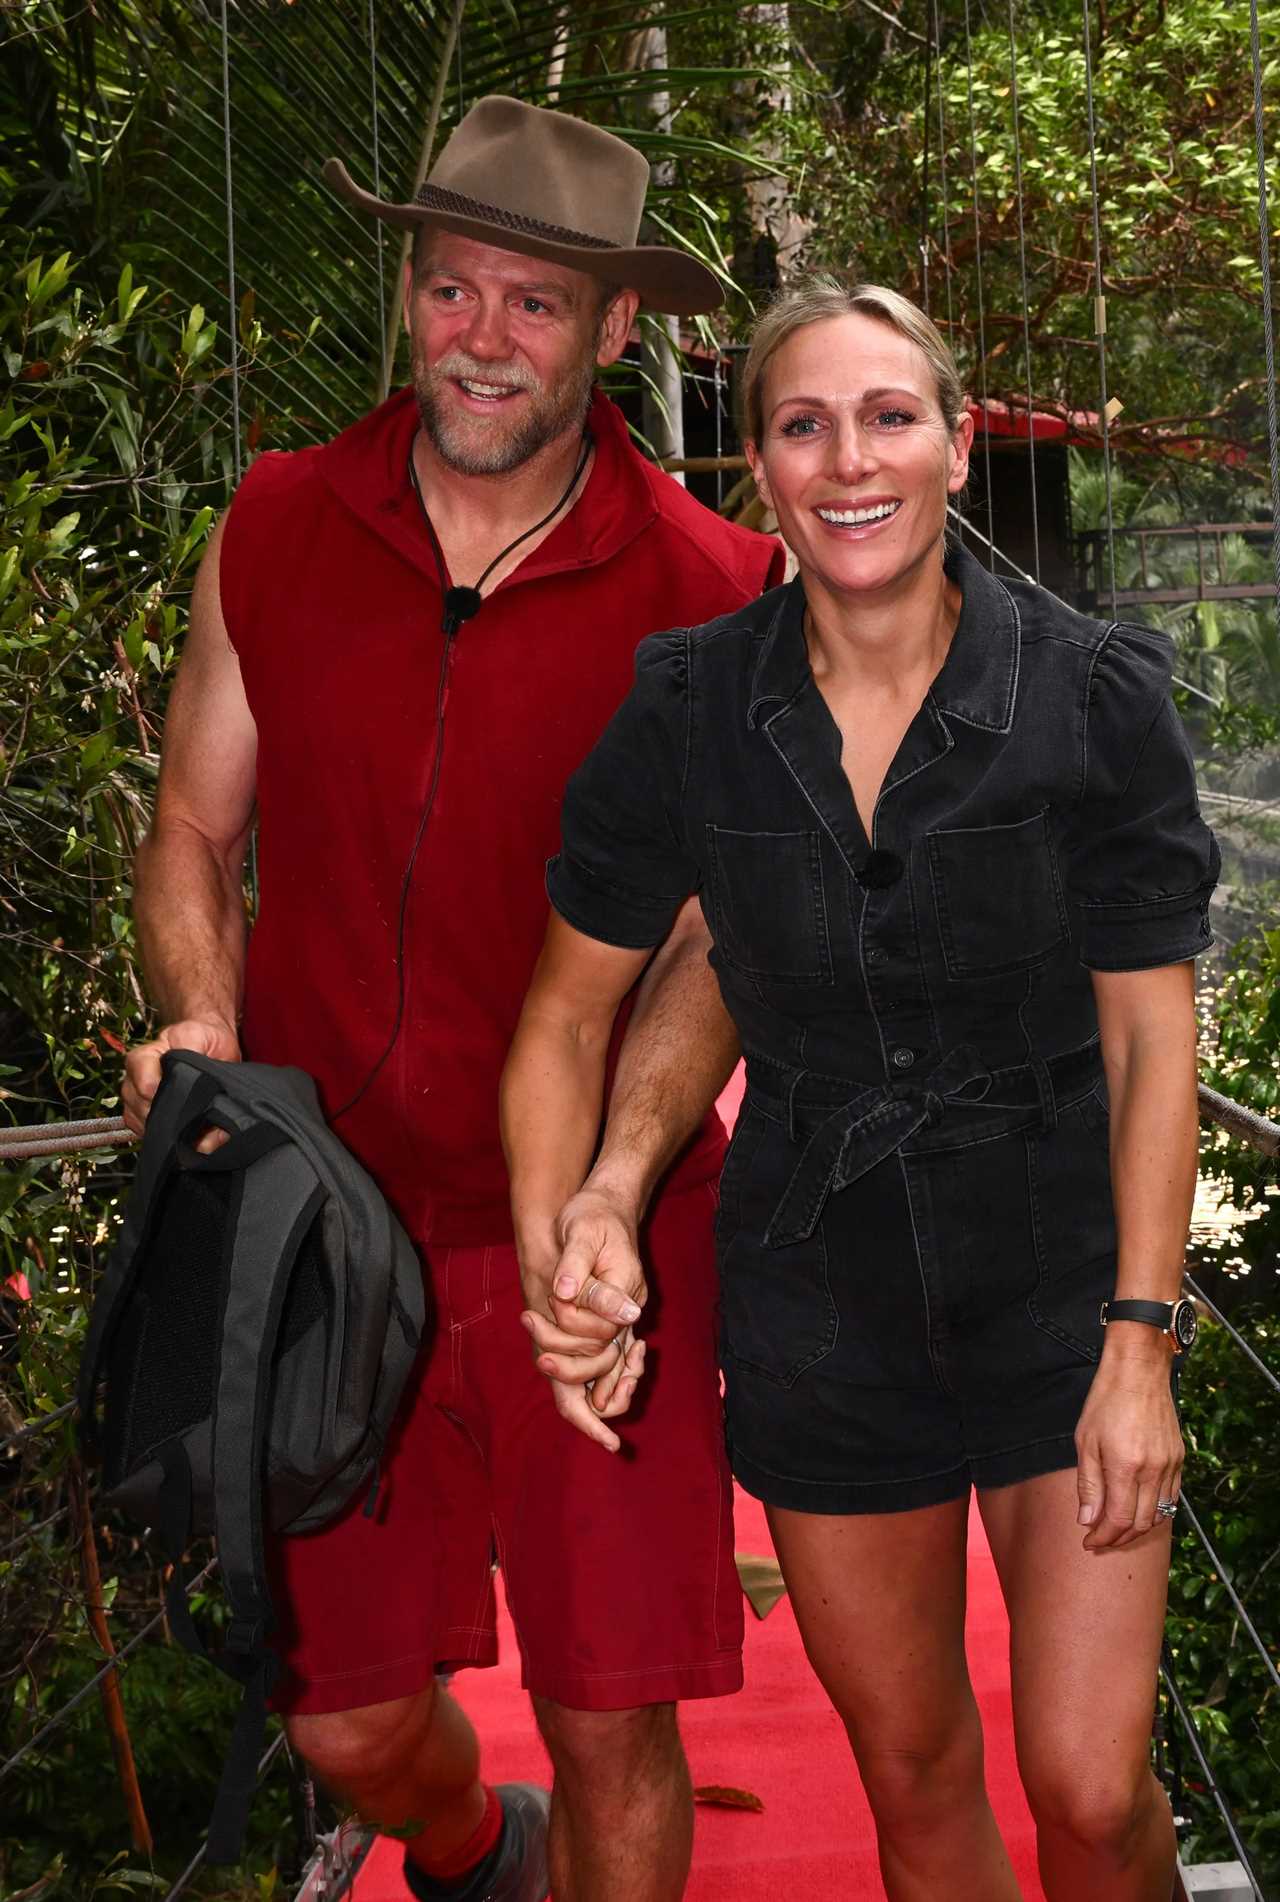 Mike Tindall and wife Zara’s I’m A Celebrity reunion hug shows they’re a perfect fit, says body language expert